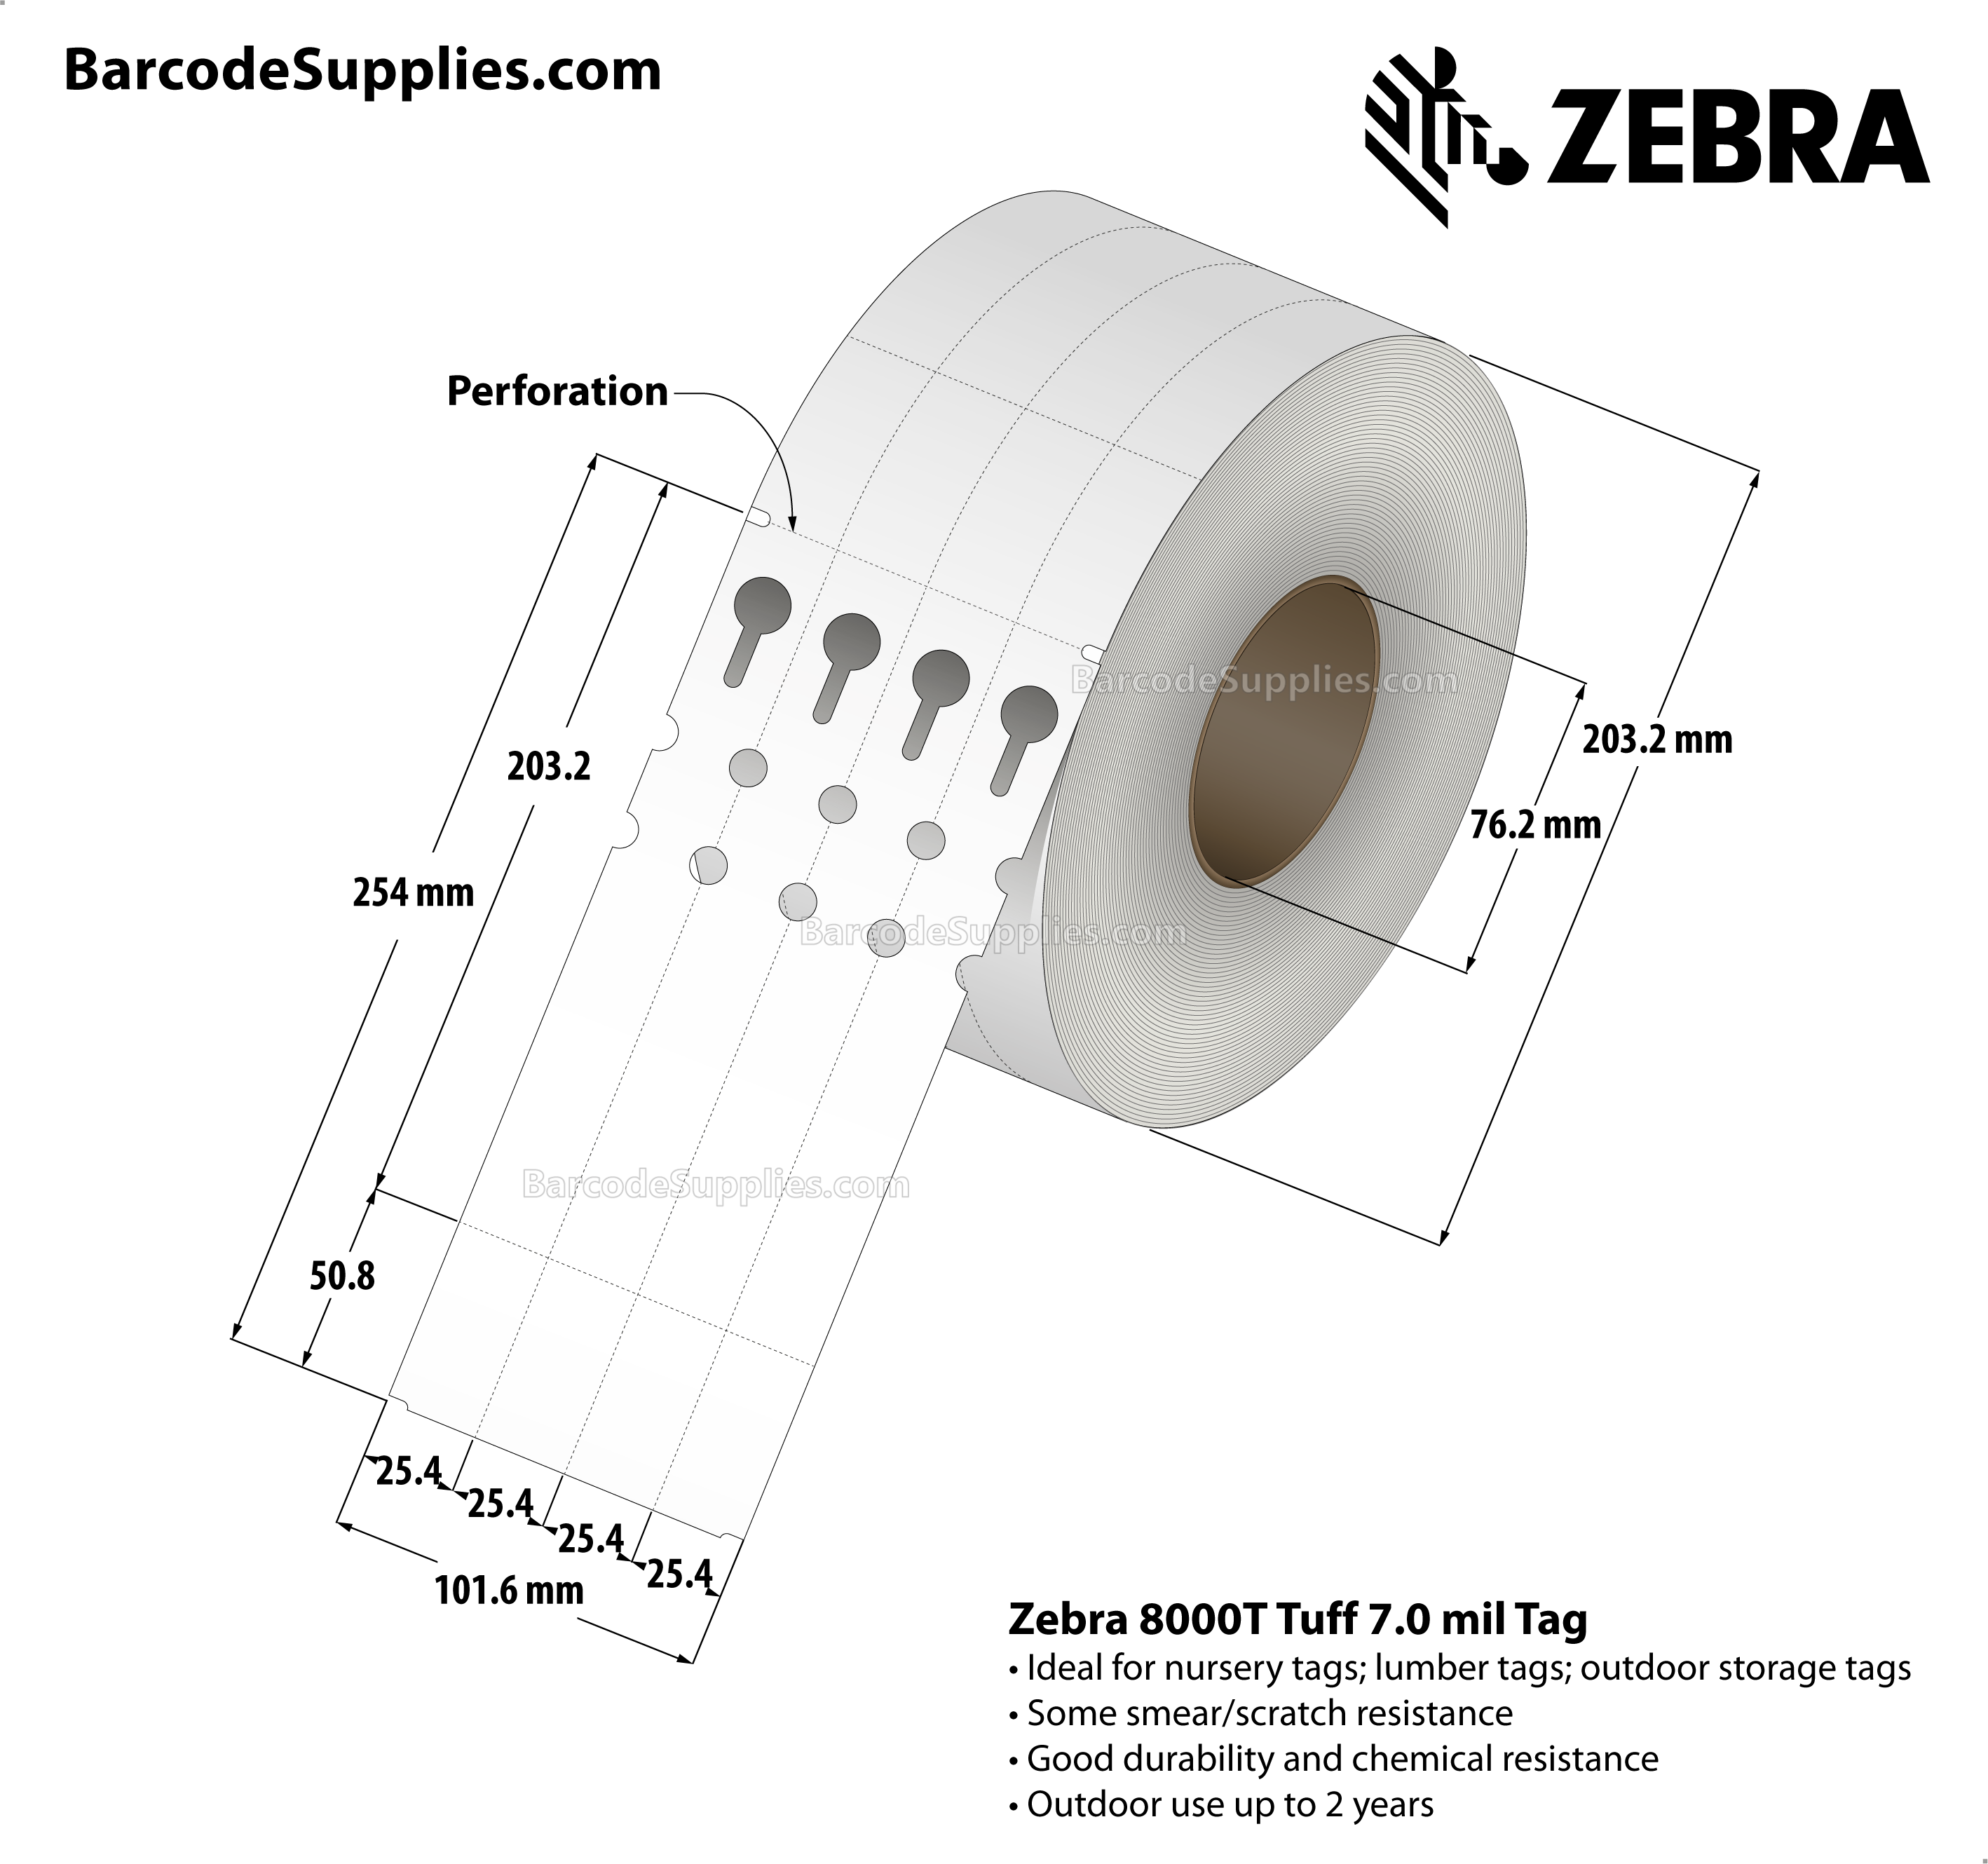 1 x 10 Thermal Transfer White 8000T Tuff 7.0 mil Tag Tags With No Adhesive - Nursery tag - Perforated - 1920 Tags Per Roll - Carton Of 4 Rolls - 7680 Tags Total - MPN: 69531